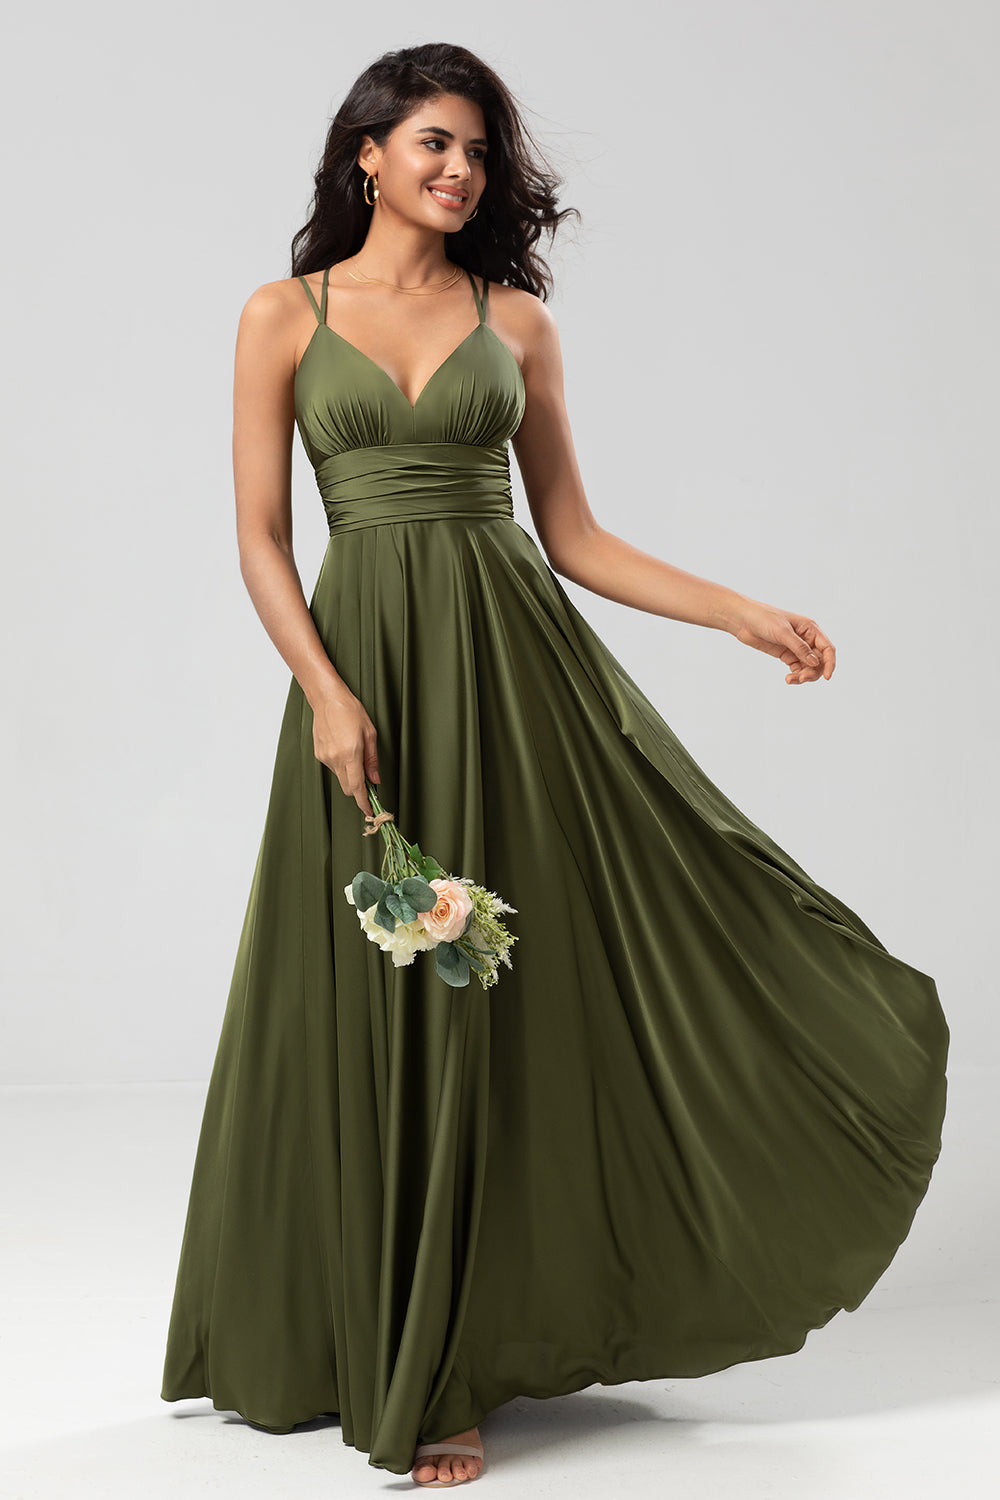 A Line Spaghetti Straps Olive Long Bridesmaid Dress with Ruffles